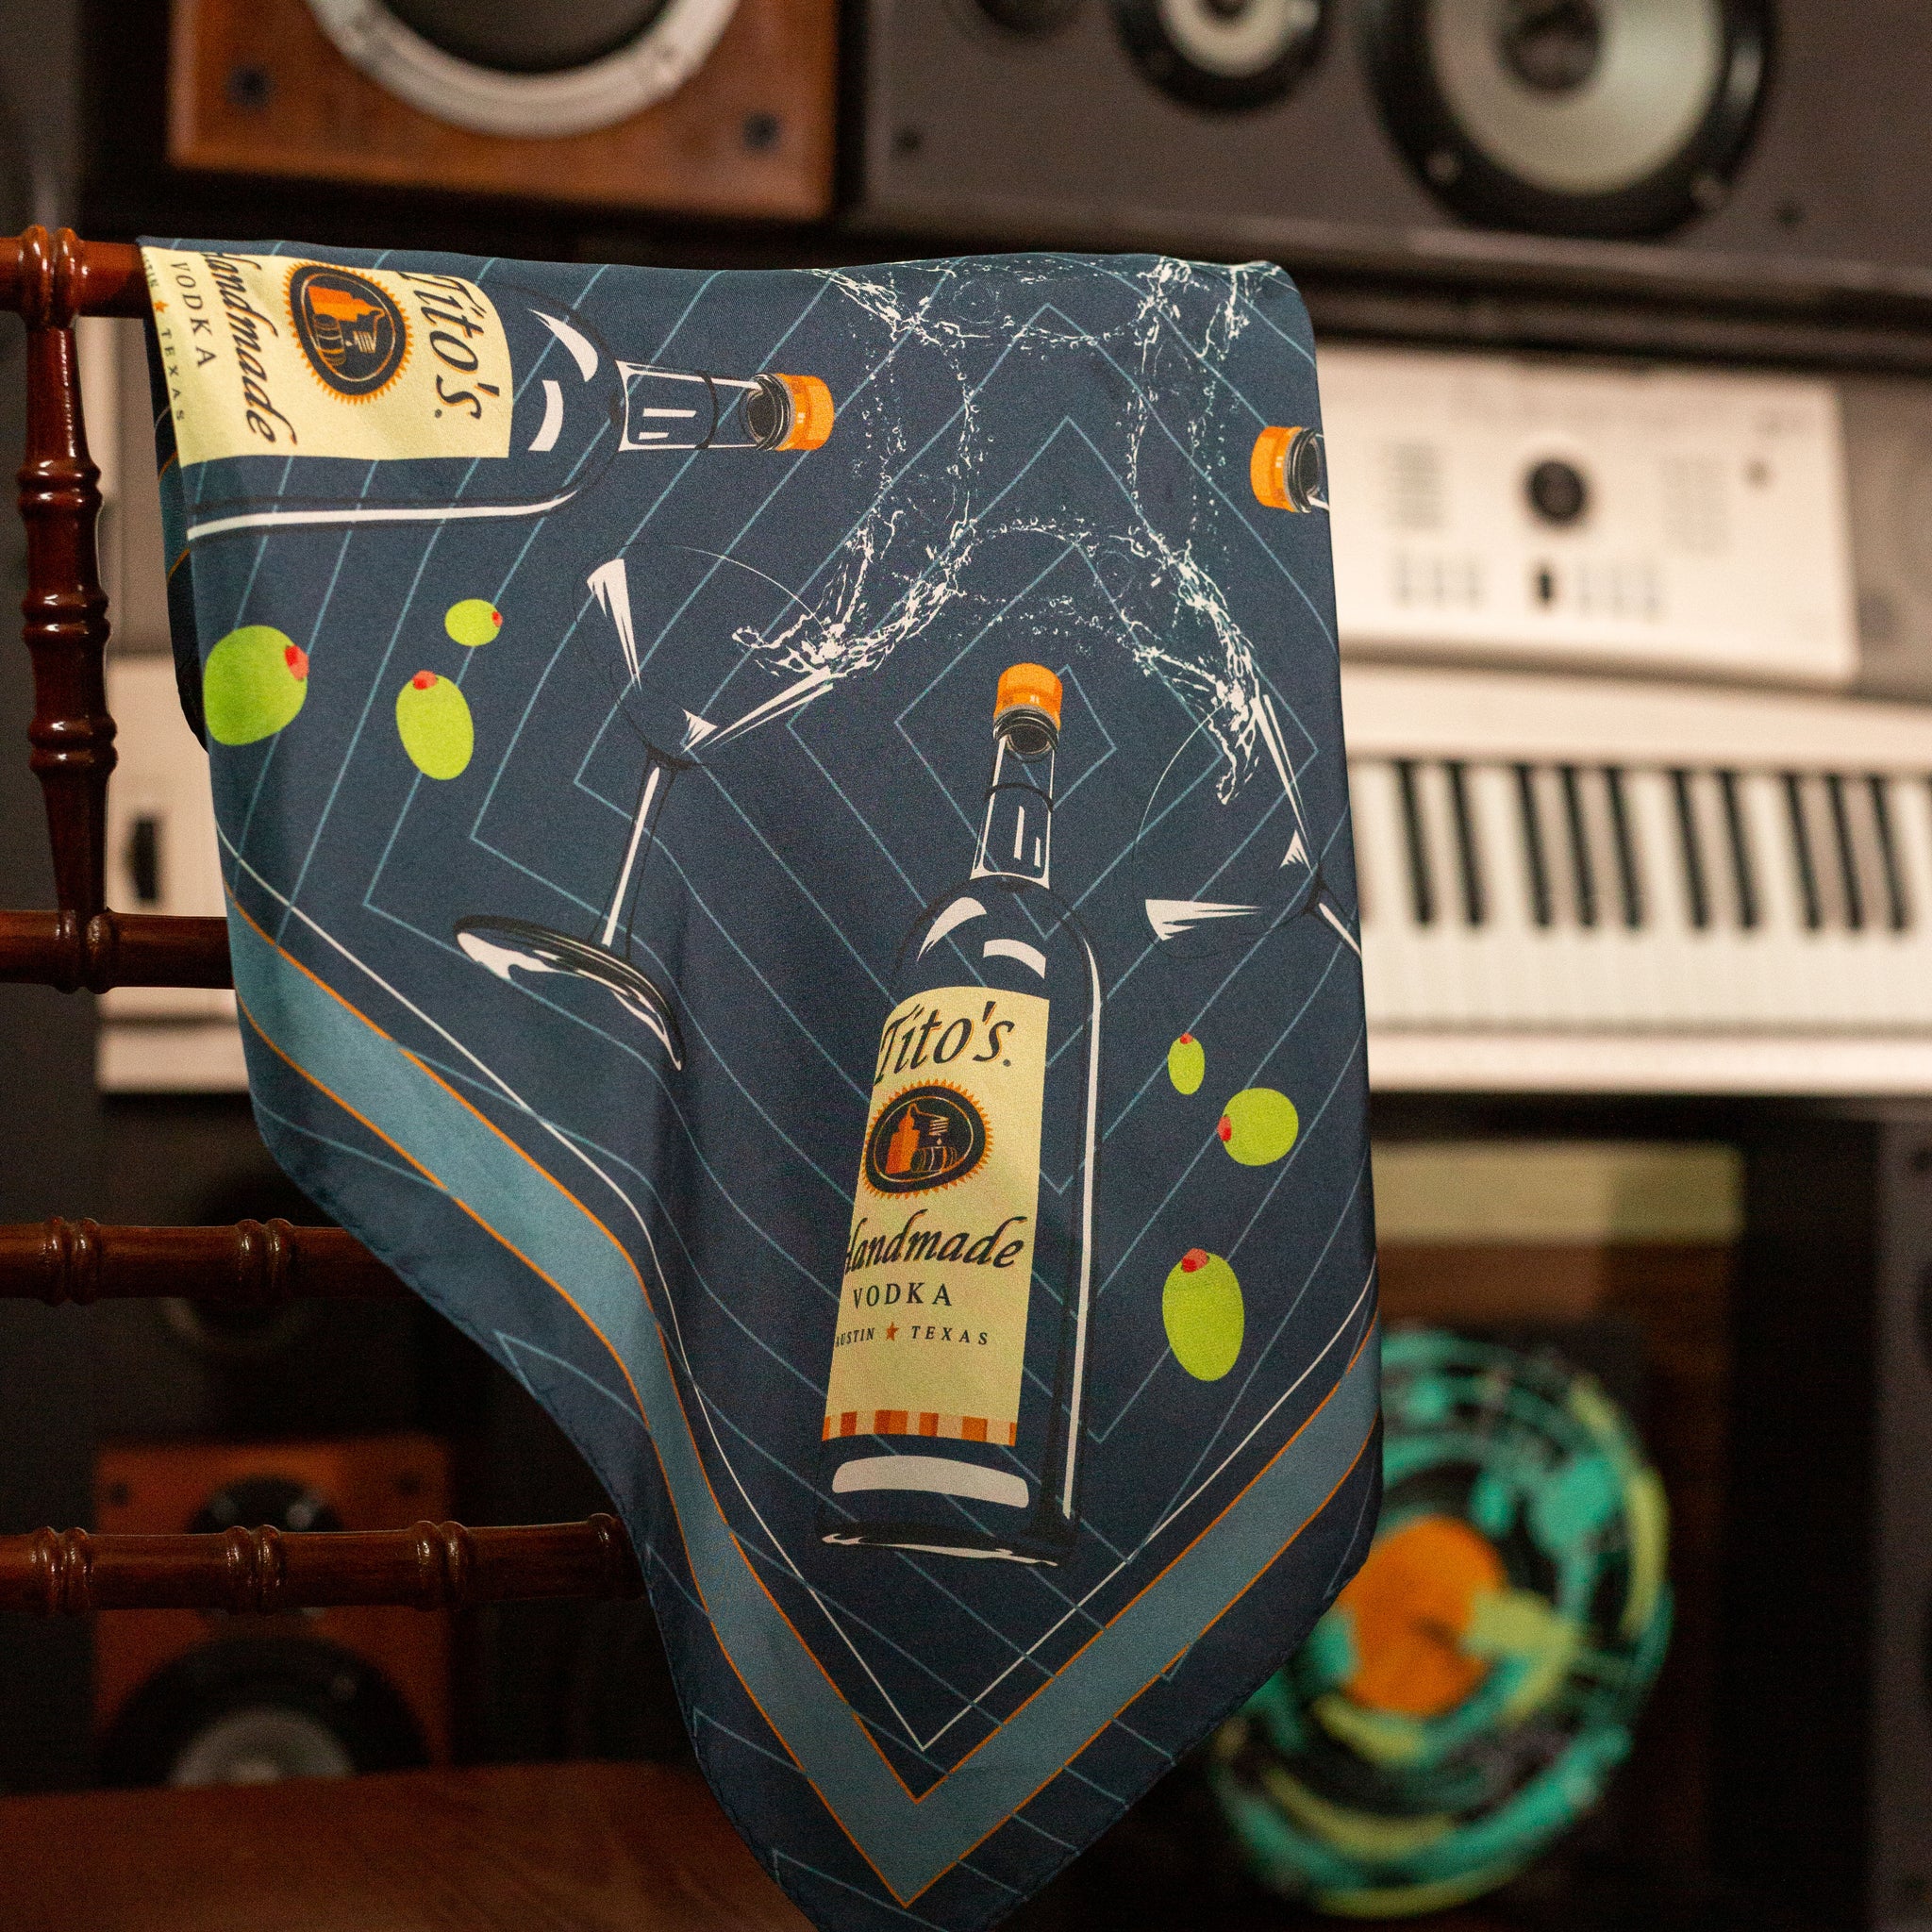 Navy silk scarf with illustrated Tito's Handmade Vodka bottle, martini glass, and green olives